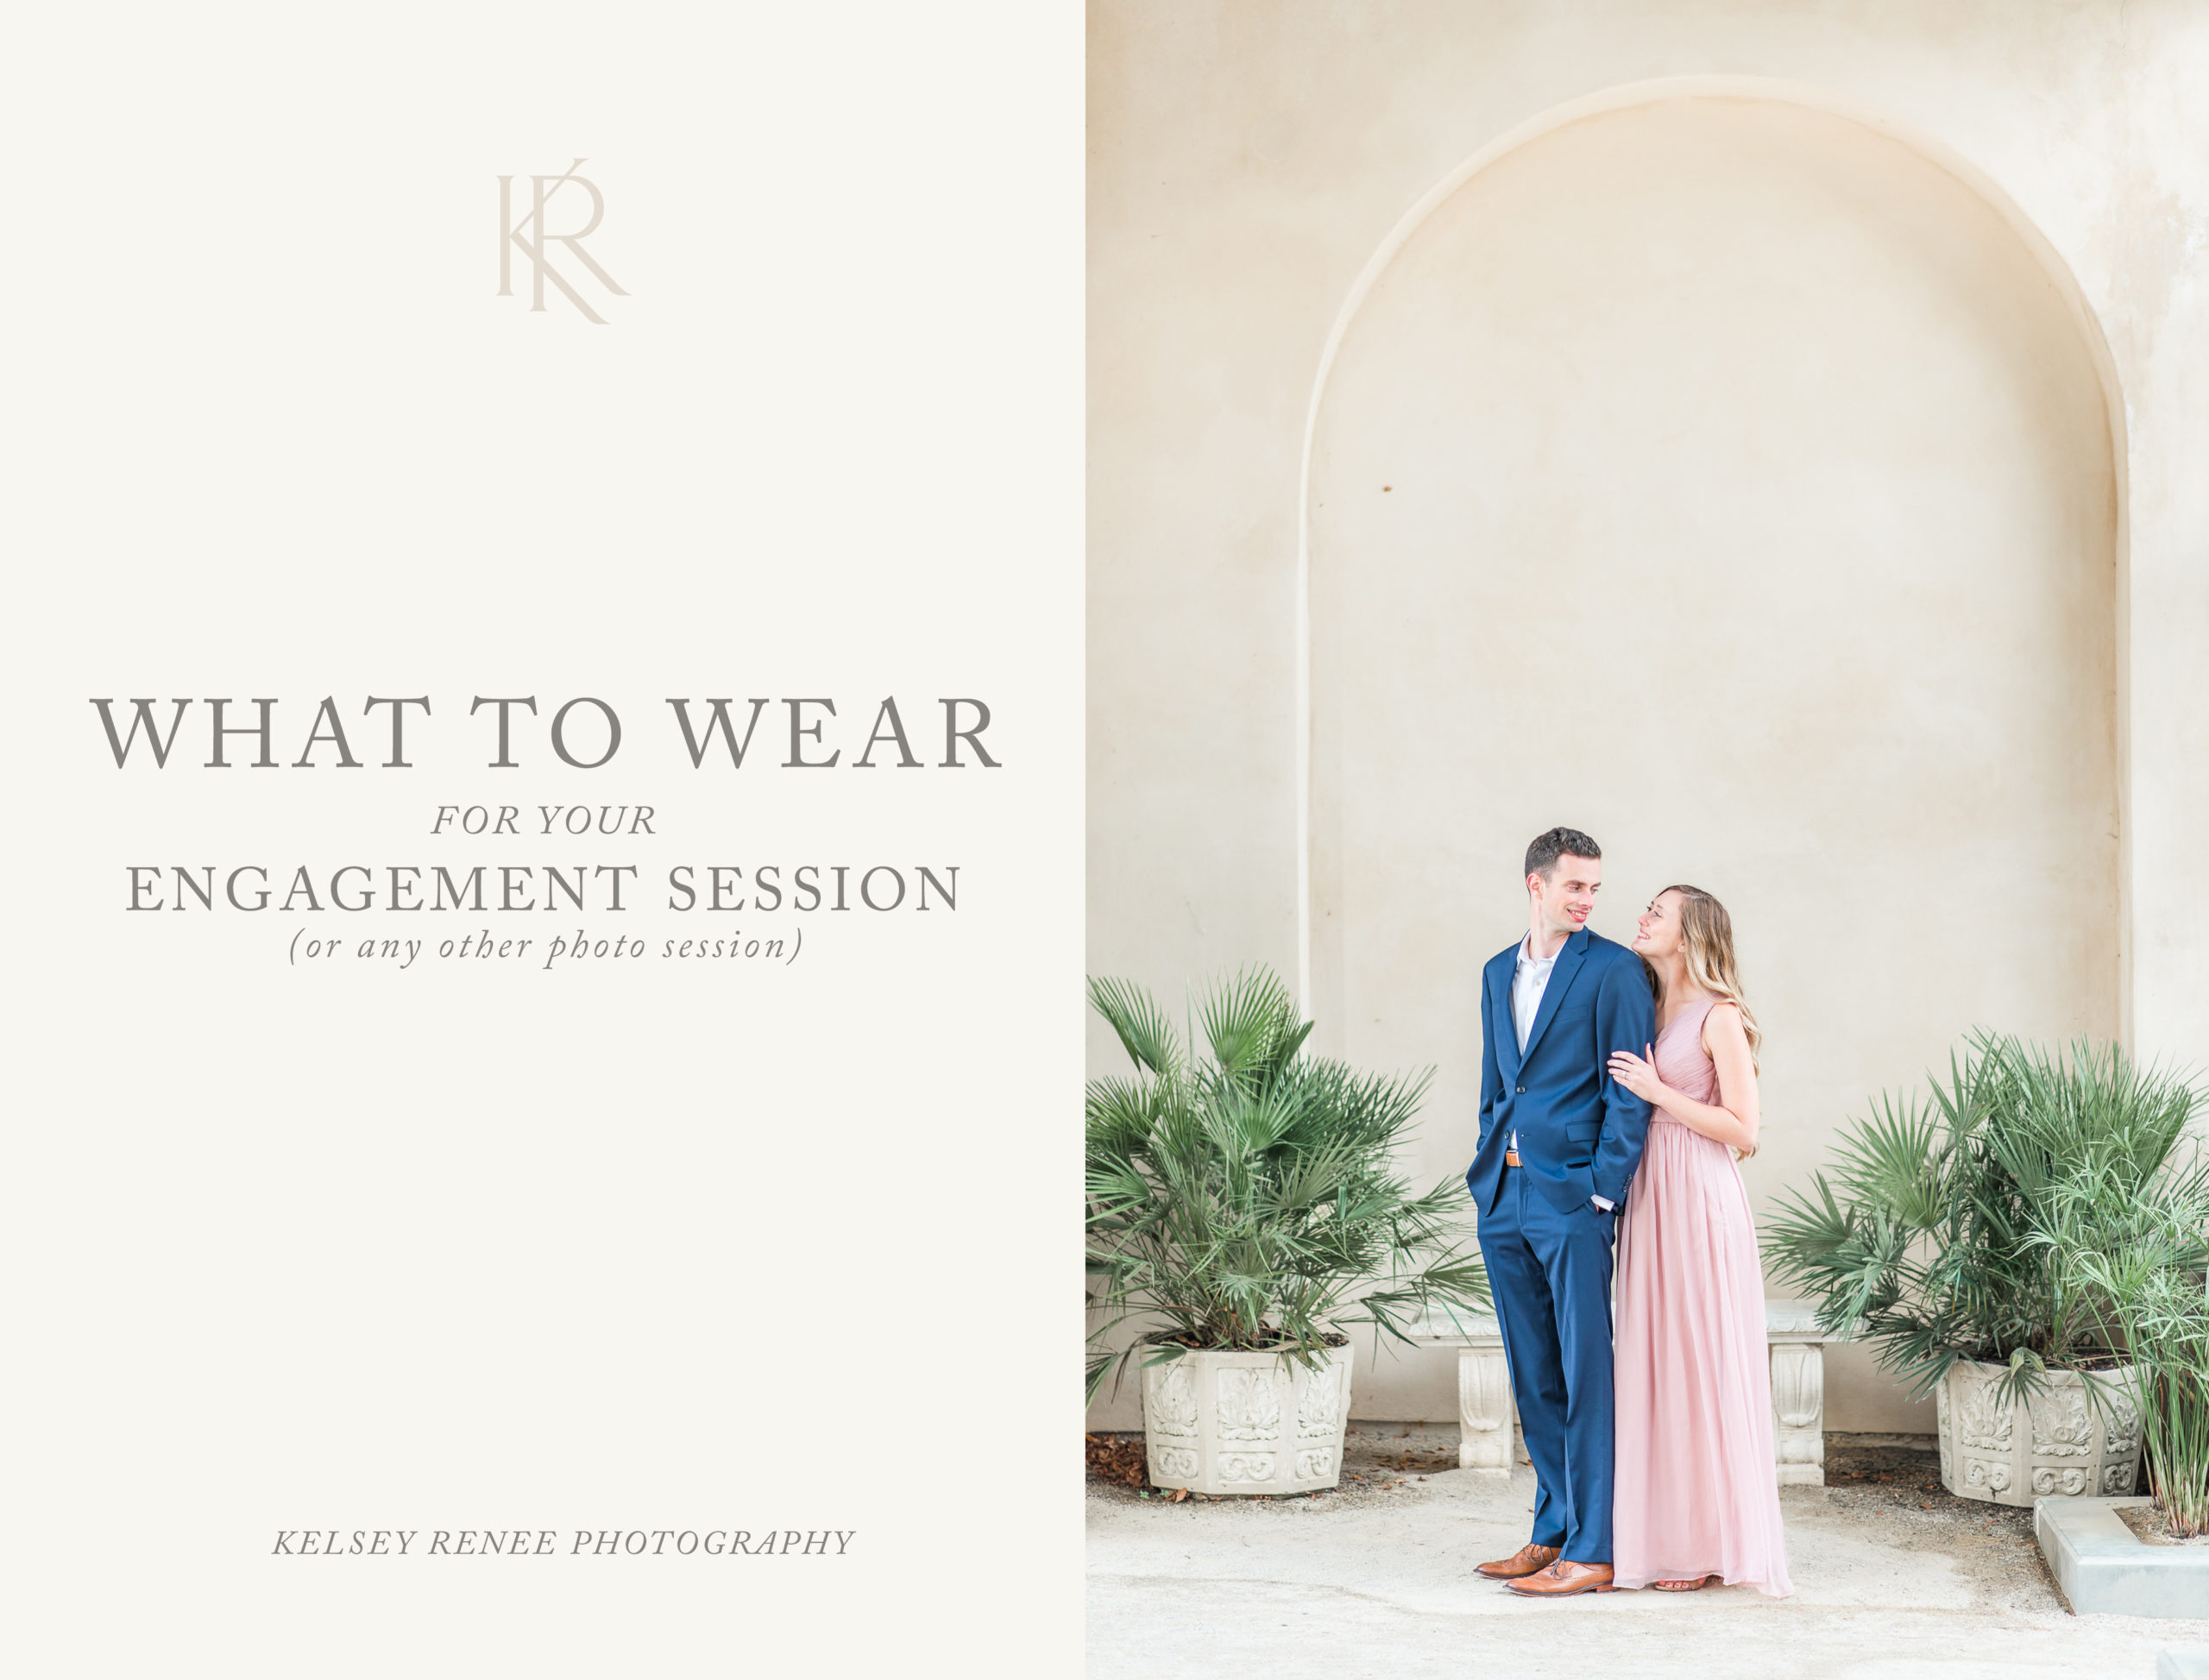 Wedding Photographer / What to Wear for your engagement session / what to wear for your photo session / outfit inspiration / engagement session outfits